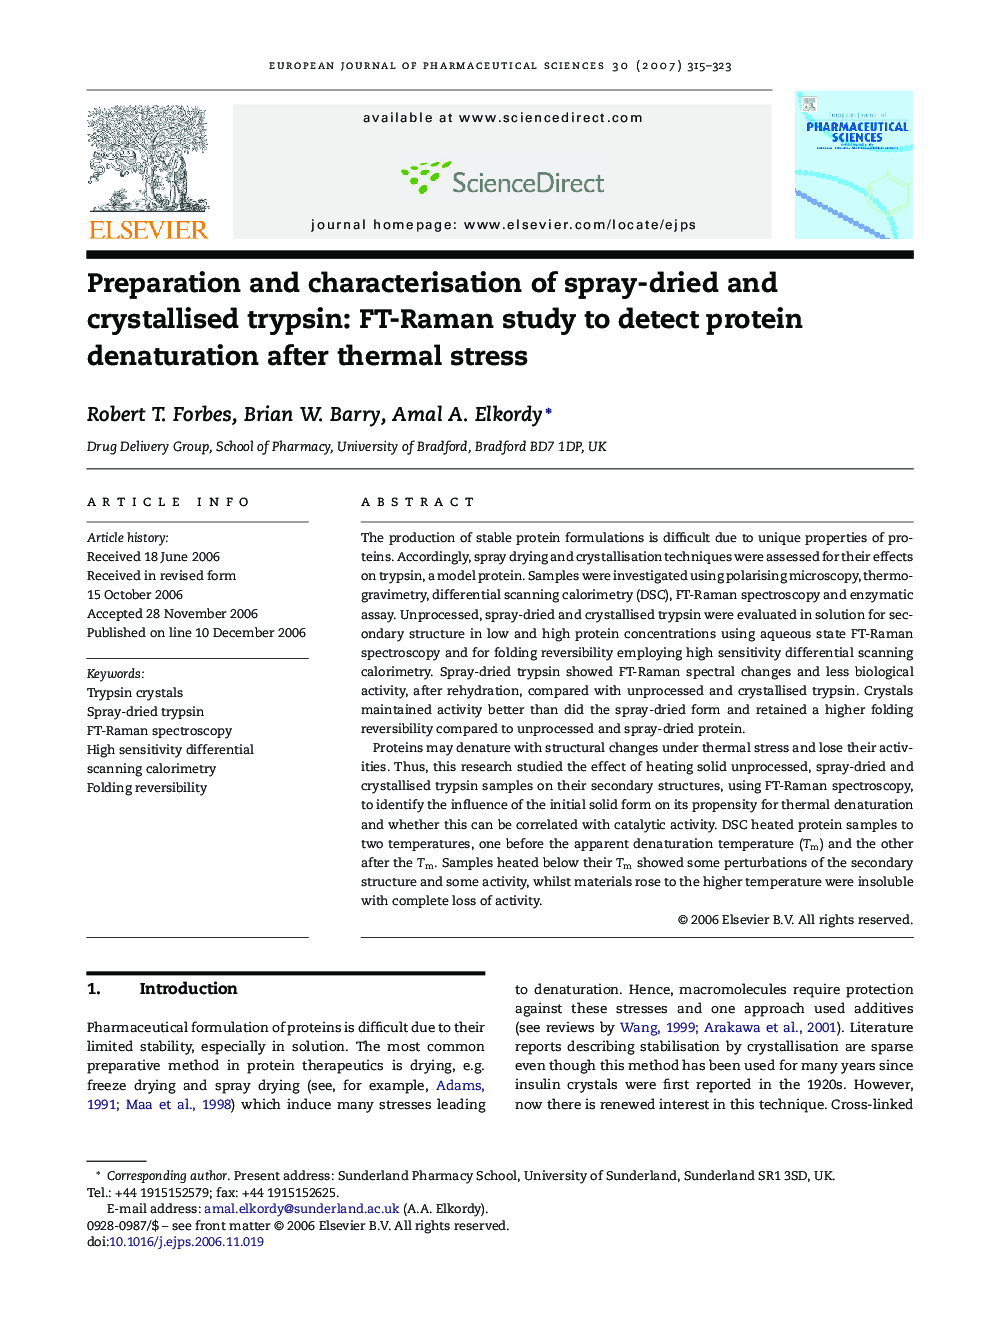 Preparation and characterisation of spray-dried and crystallised trypsin: FT-Raman study to detect protein denaturation after thermal stress